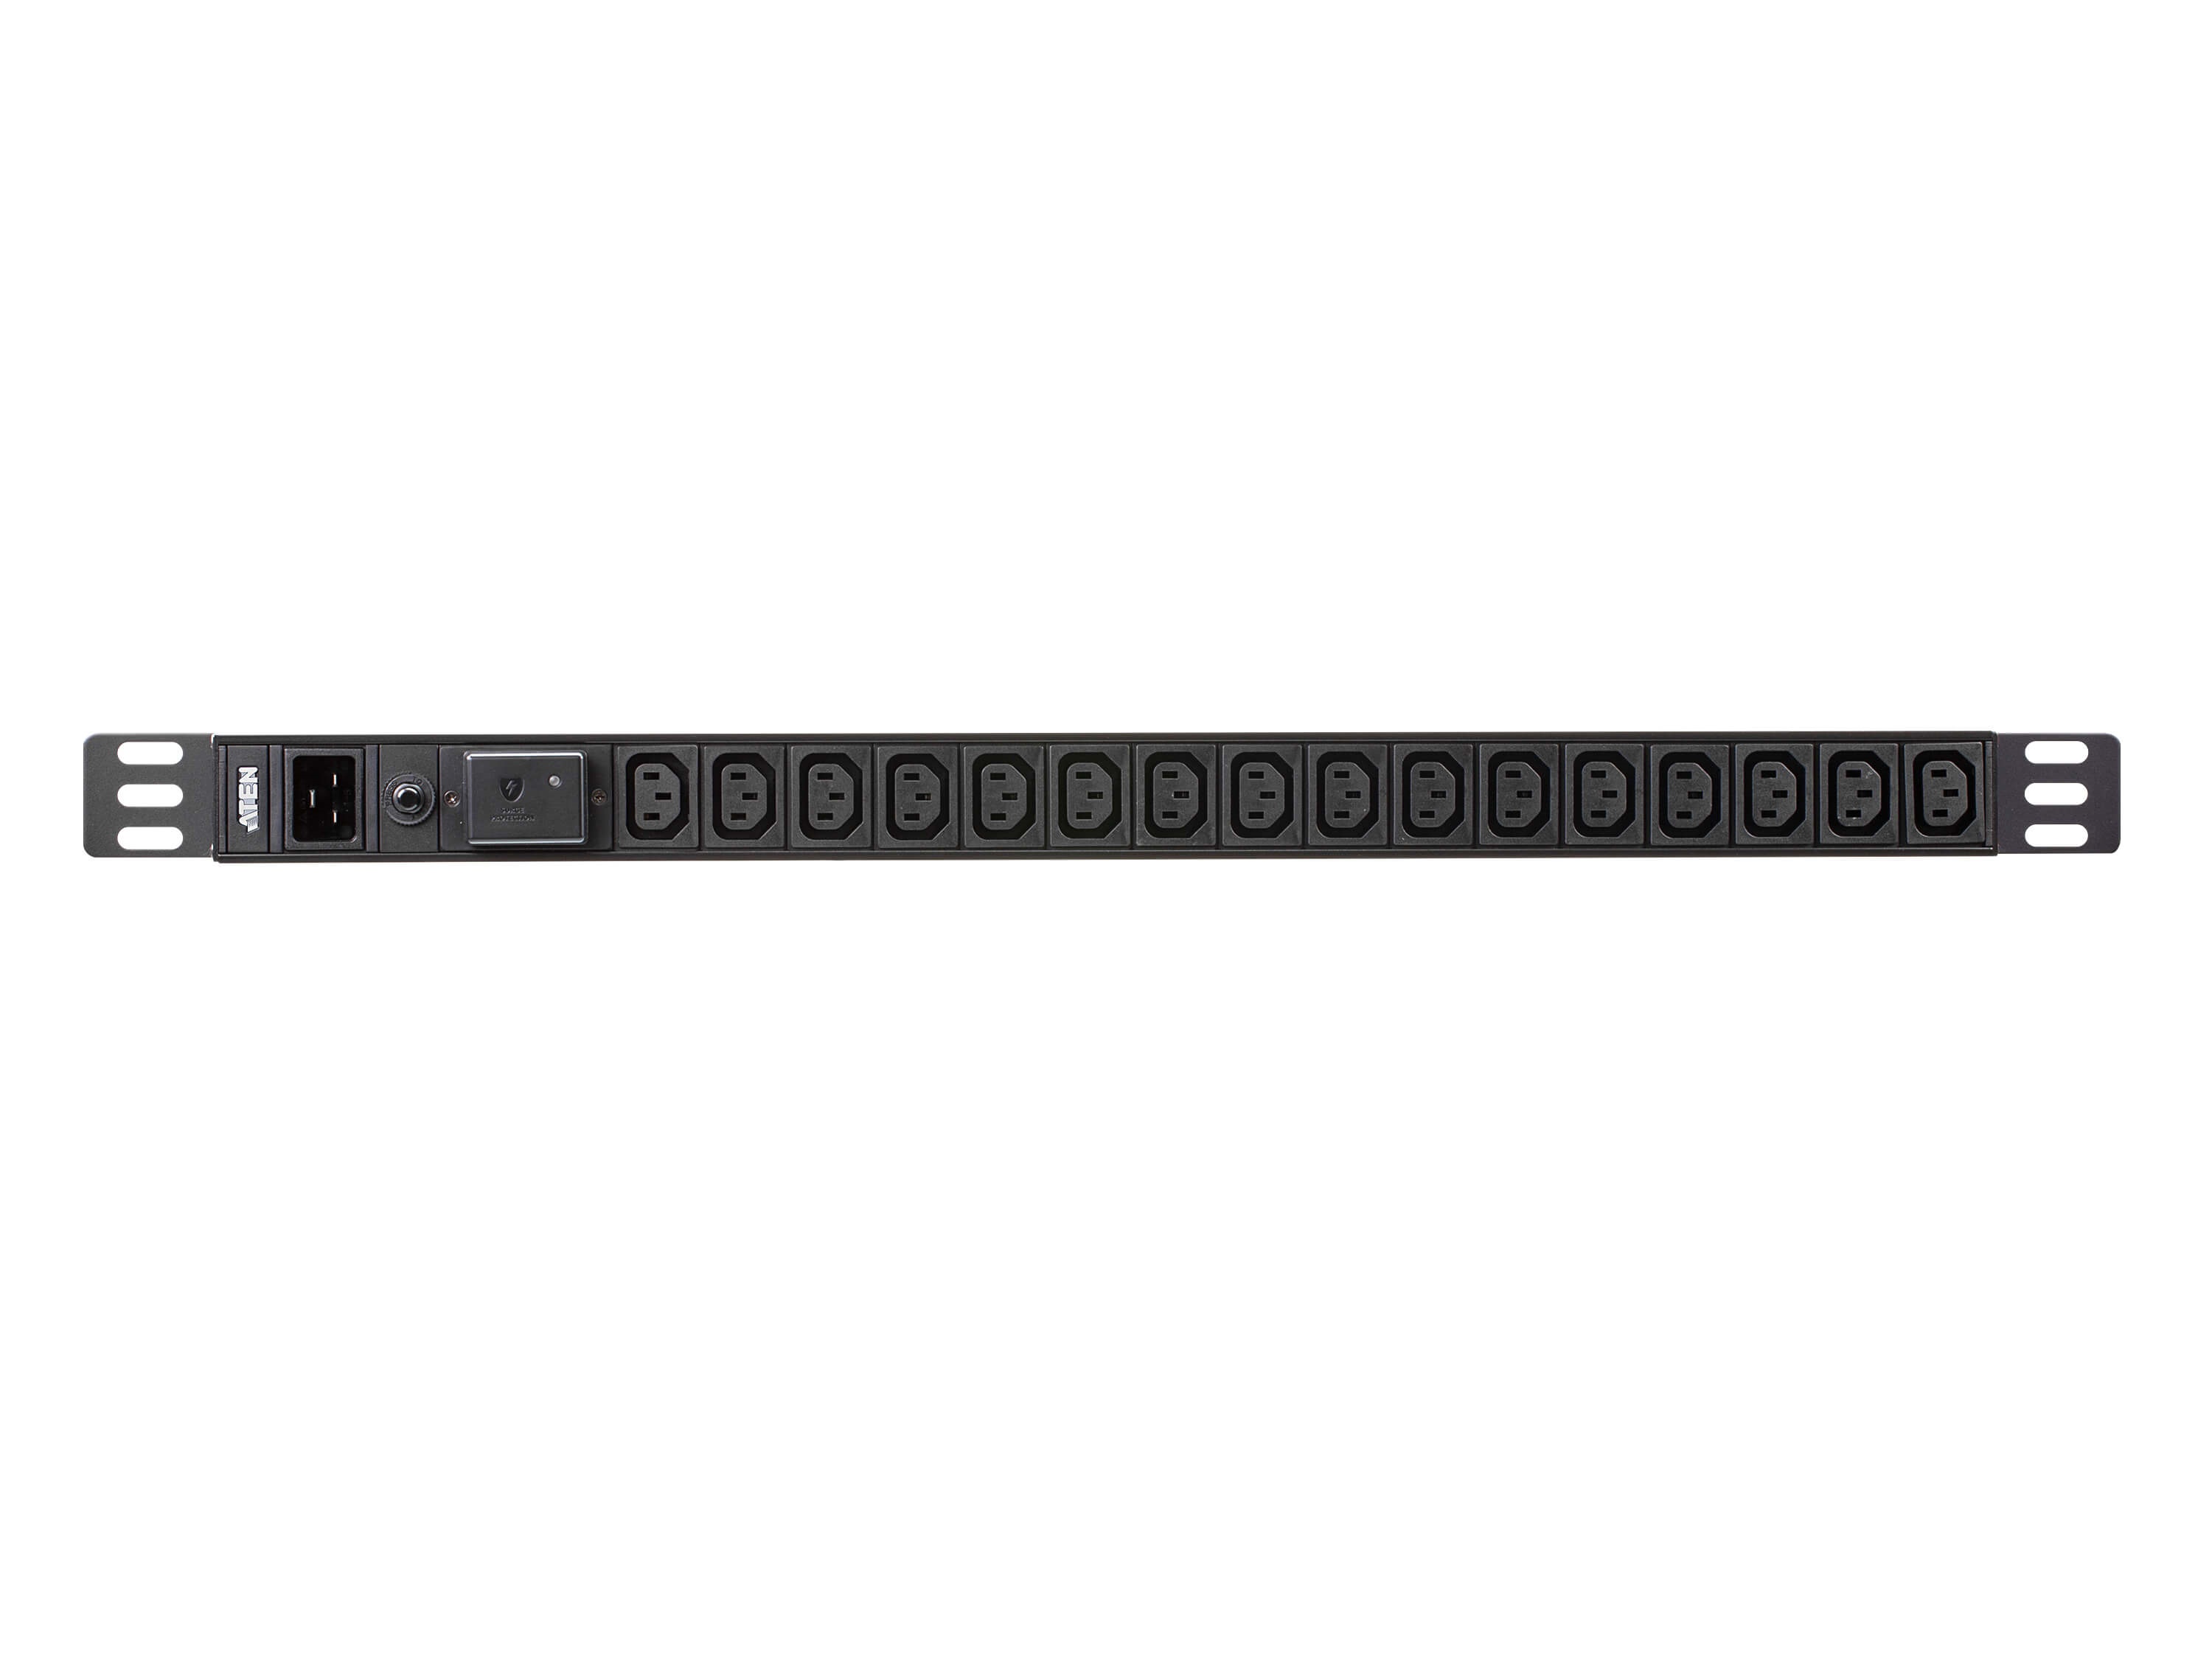 Aten PE0216SB Basic PDU with Surge Protection/100-240 VAC/20A Max